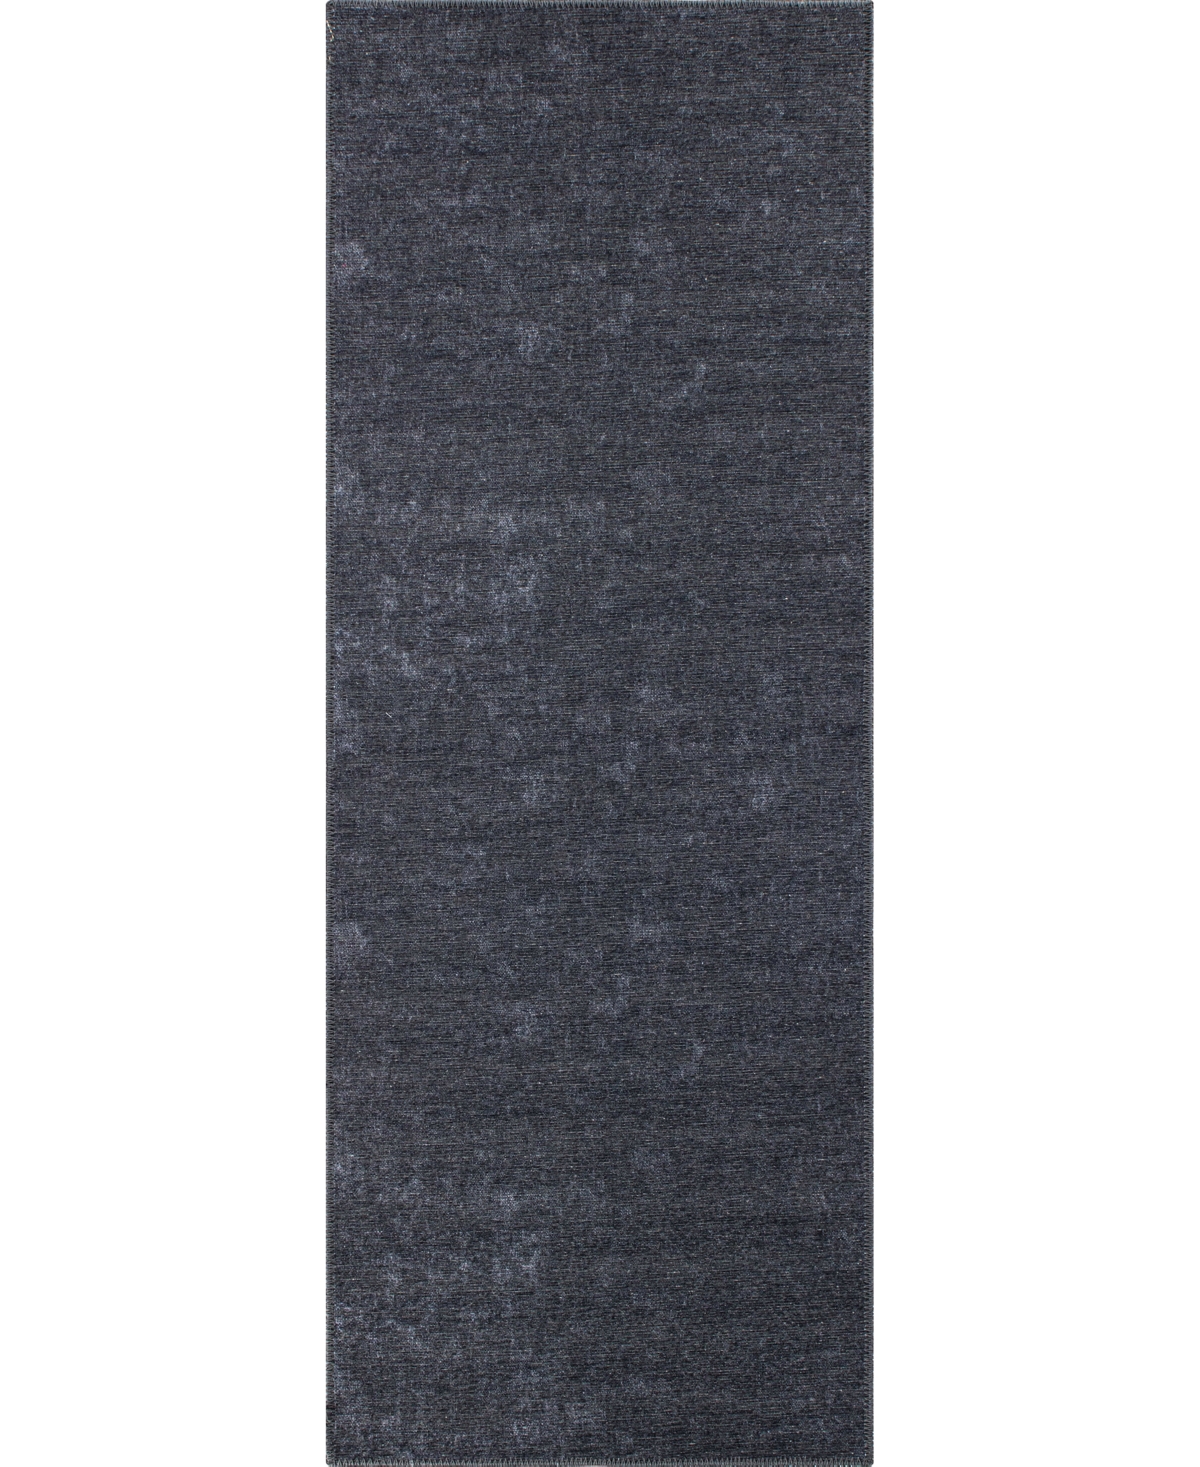 Main Street Rugs Lecco 5084 2'6" X 7' Runner Area Rug In Charcoal